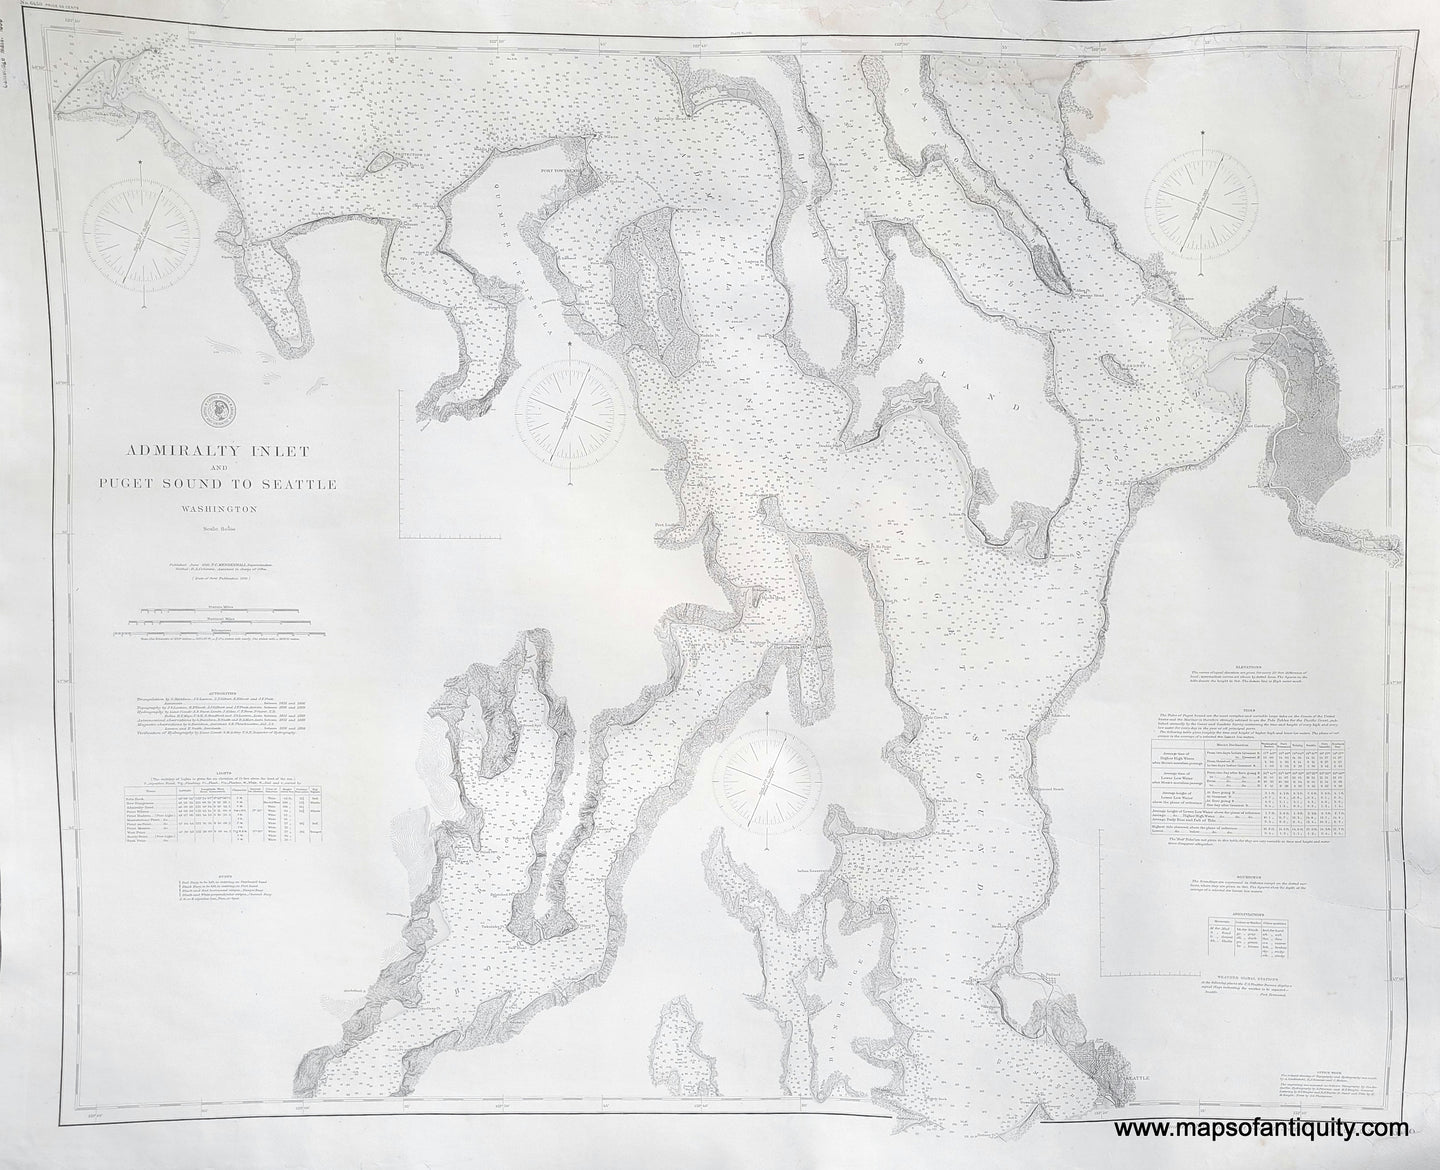 Impressive black and white sailing chart of part of Puget Sound with the vicinity around Seattle, Washington, from 1891. Dynamic image showing the coastline as it was in the late 1800s, before the major fill projects around Seattle.